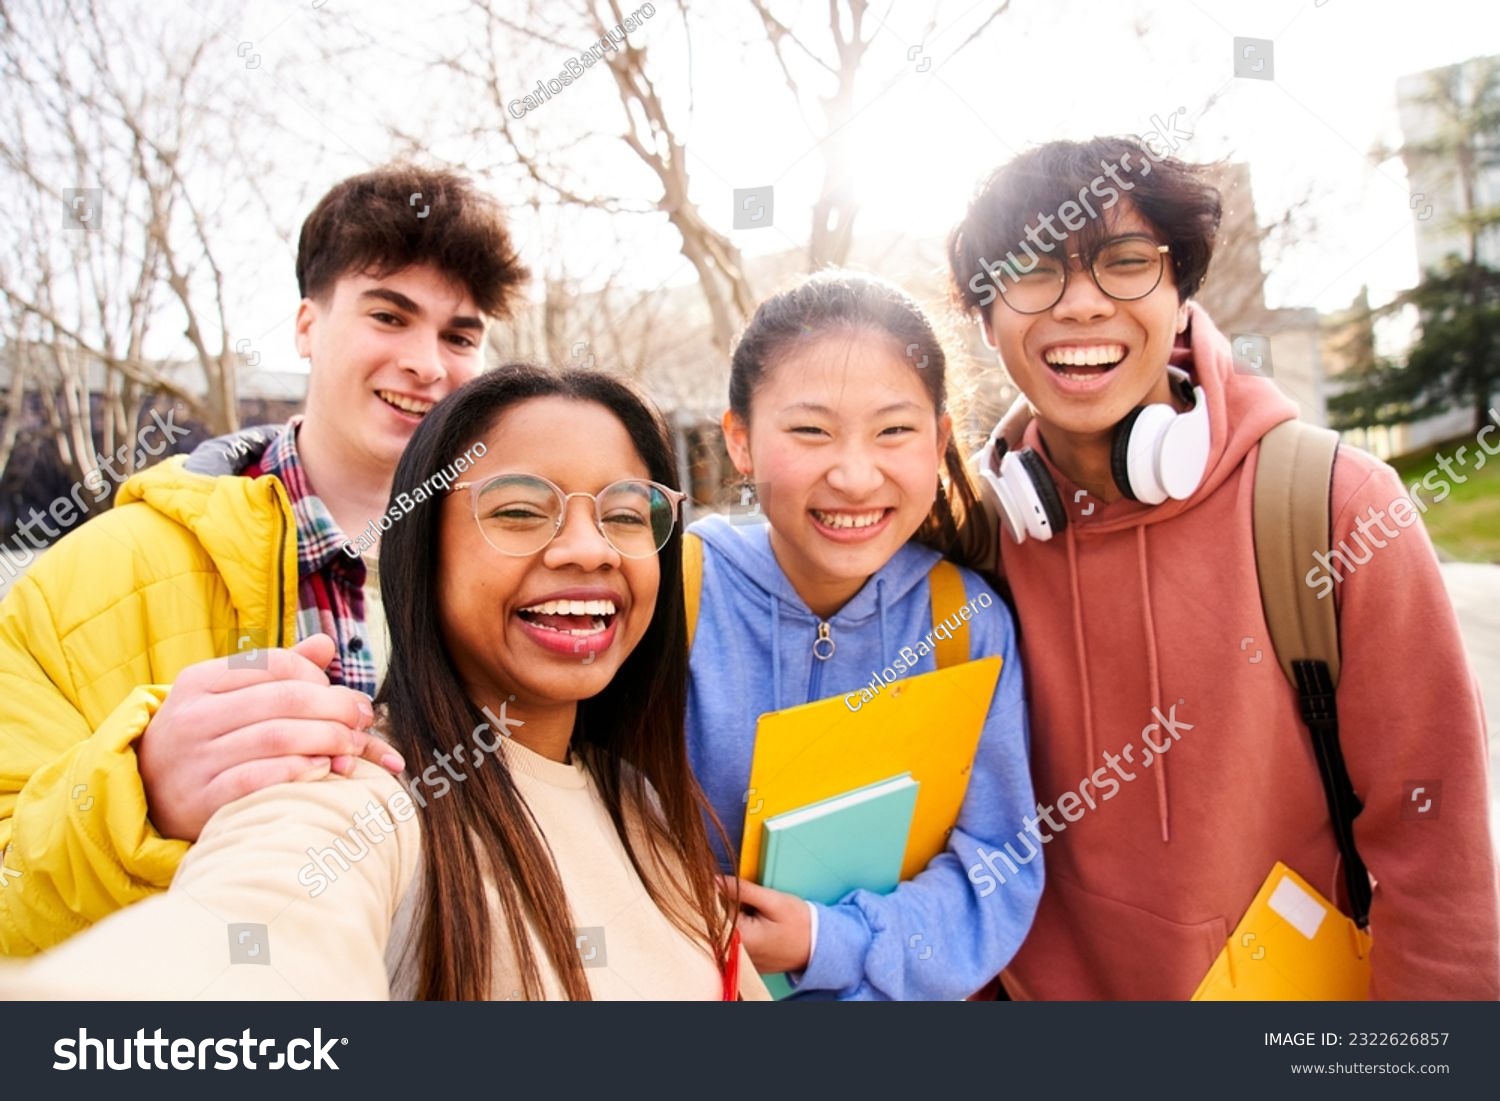 Group of multi-ethnic high school students taking a selfie outdoors at the university campus holding folders. Looking at camera picture of a diverse colleagues having fun.  #2322626857